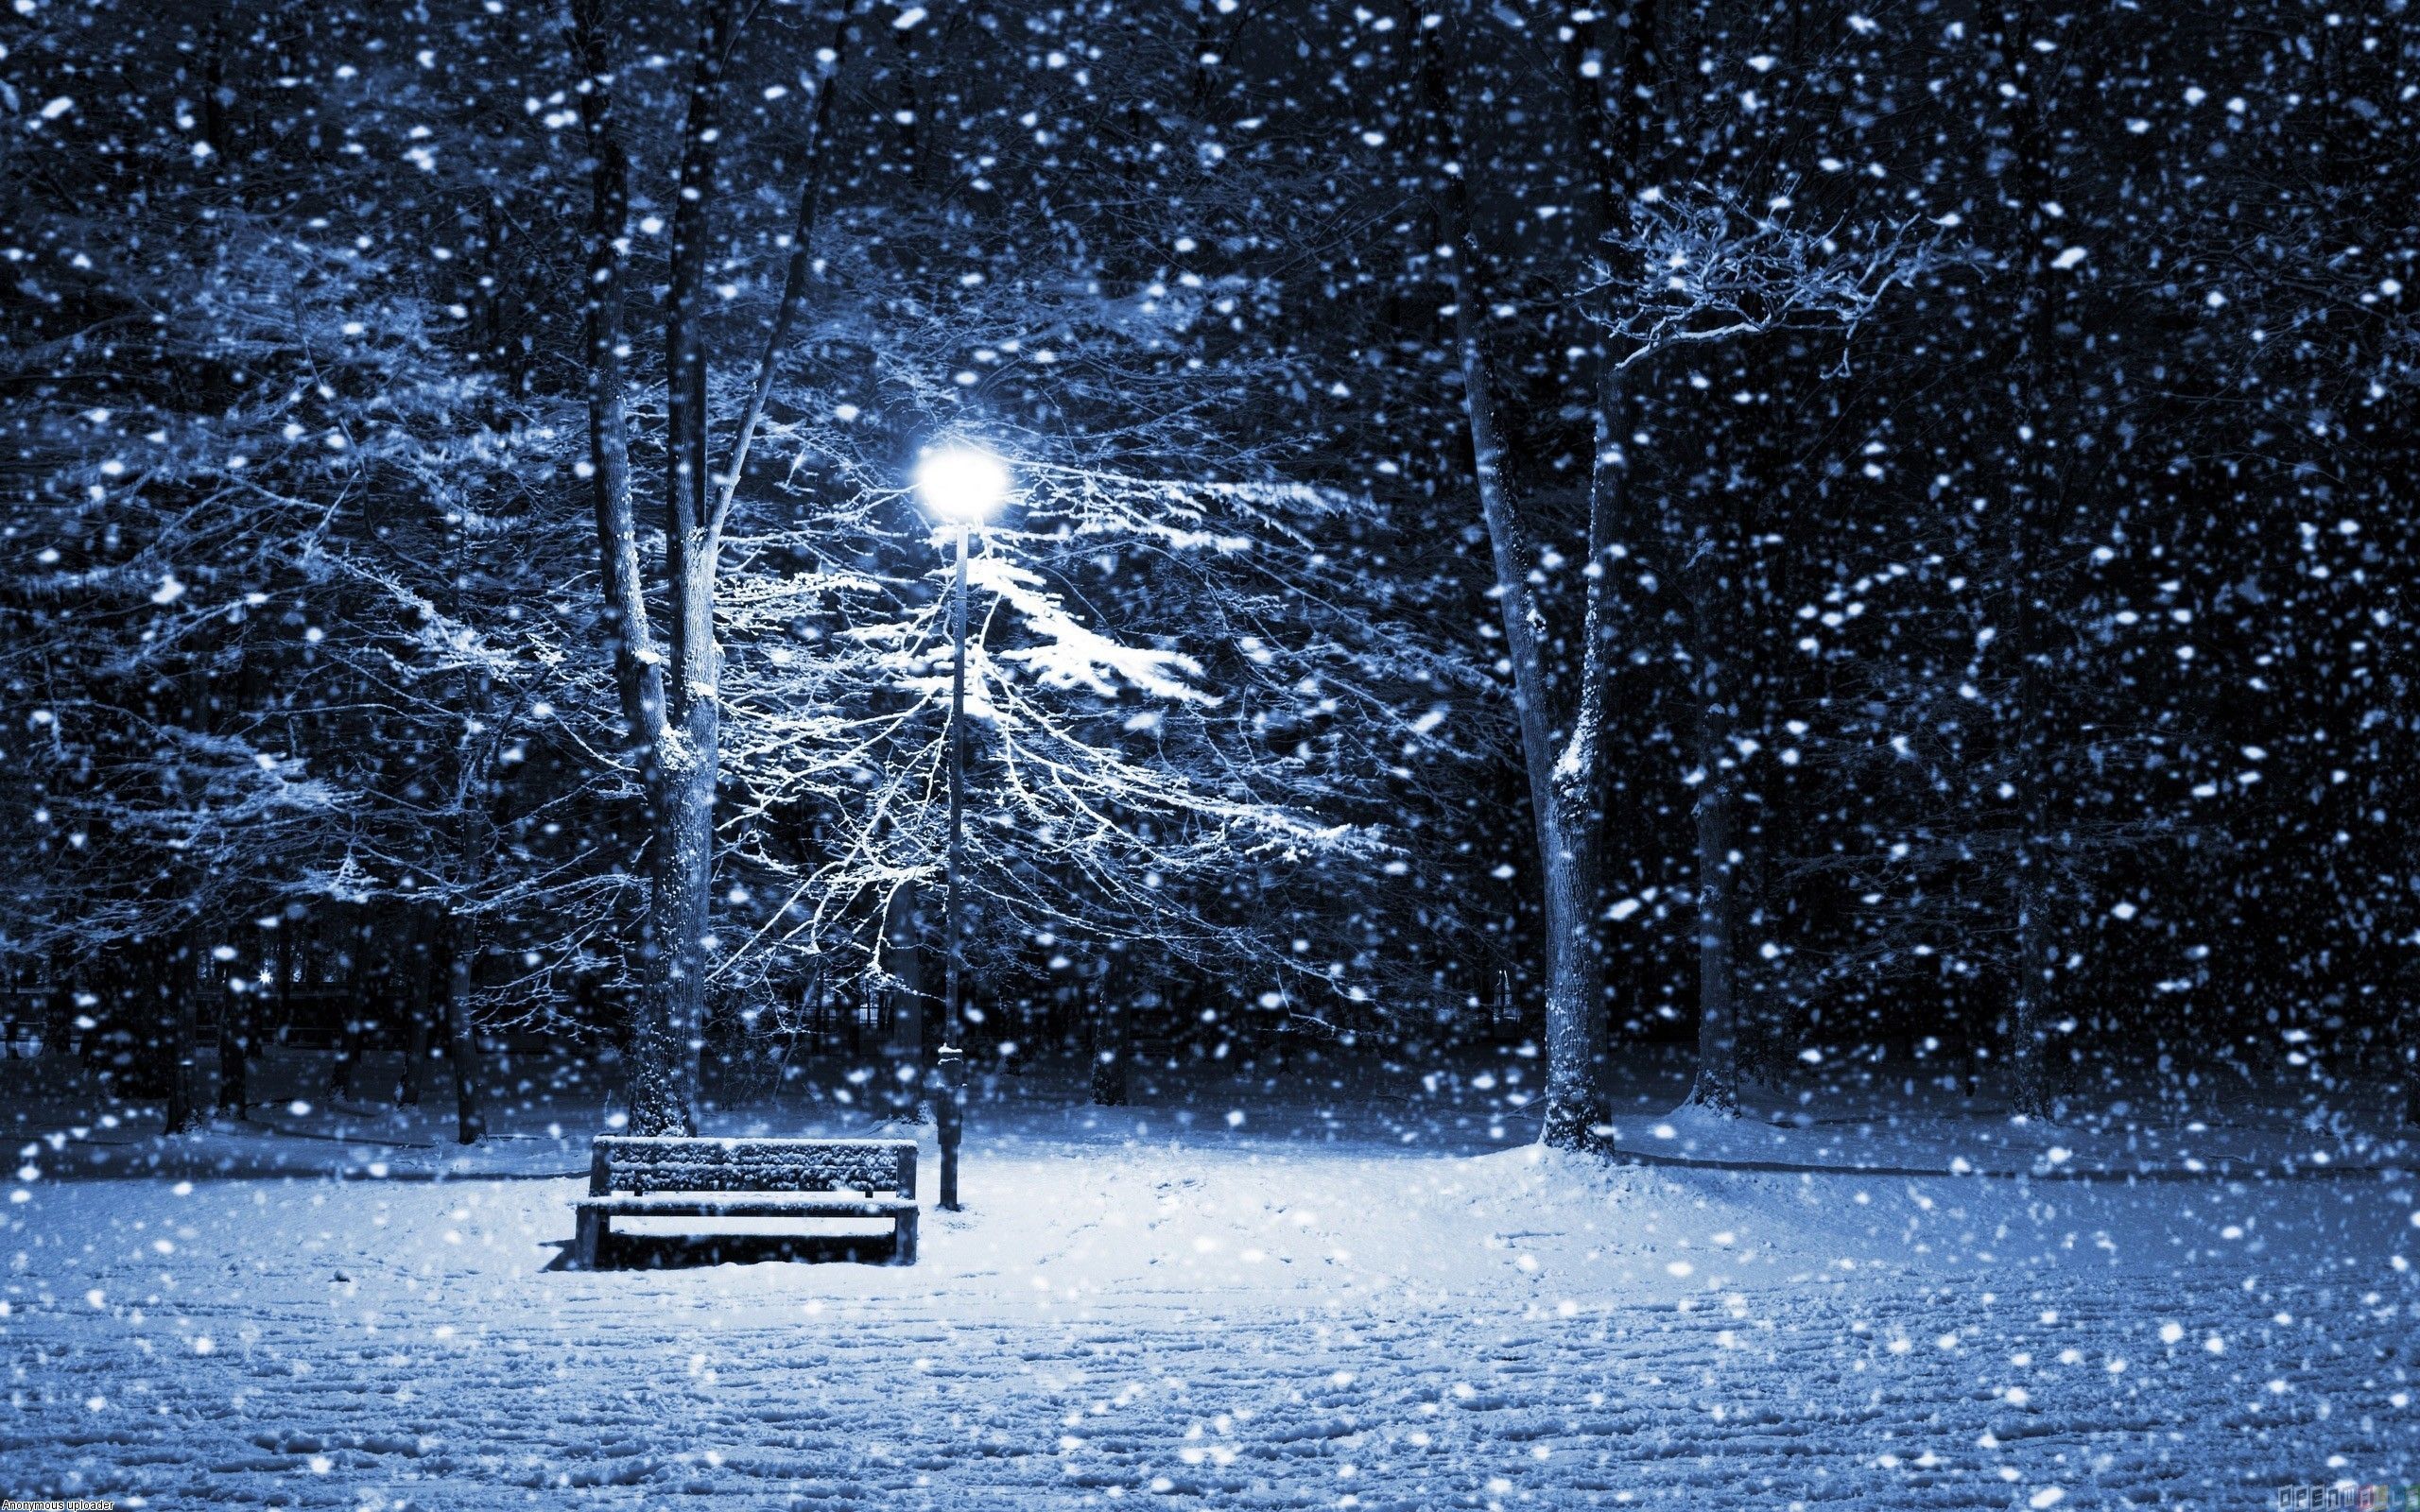 Snow Falling Wallpapers